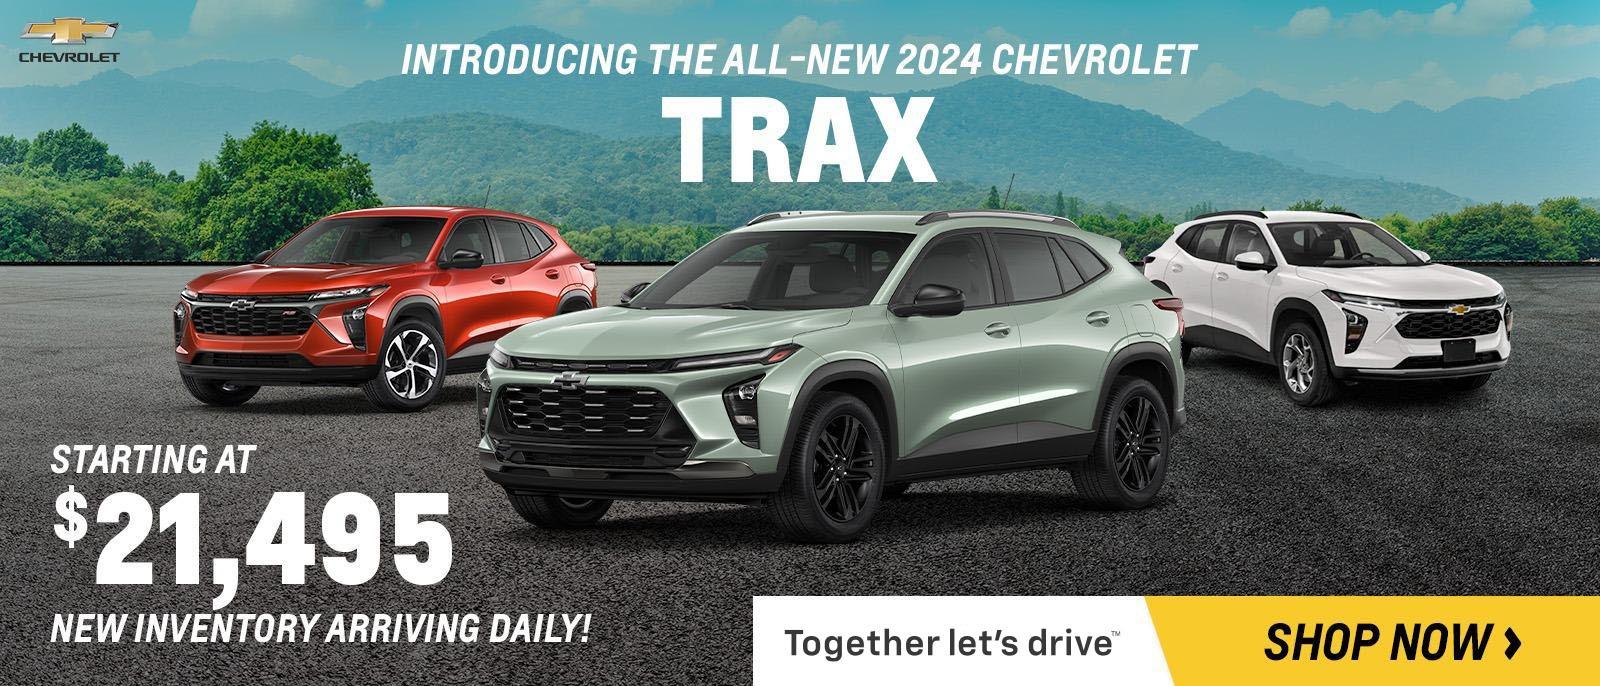 All-New 2024 Chevrolet Trax